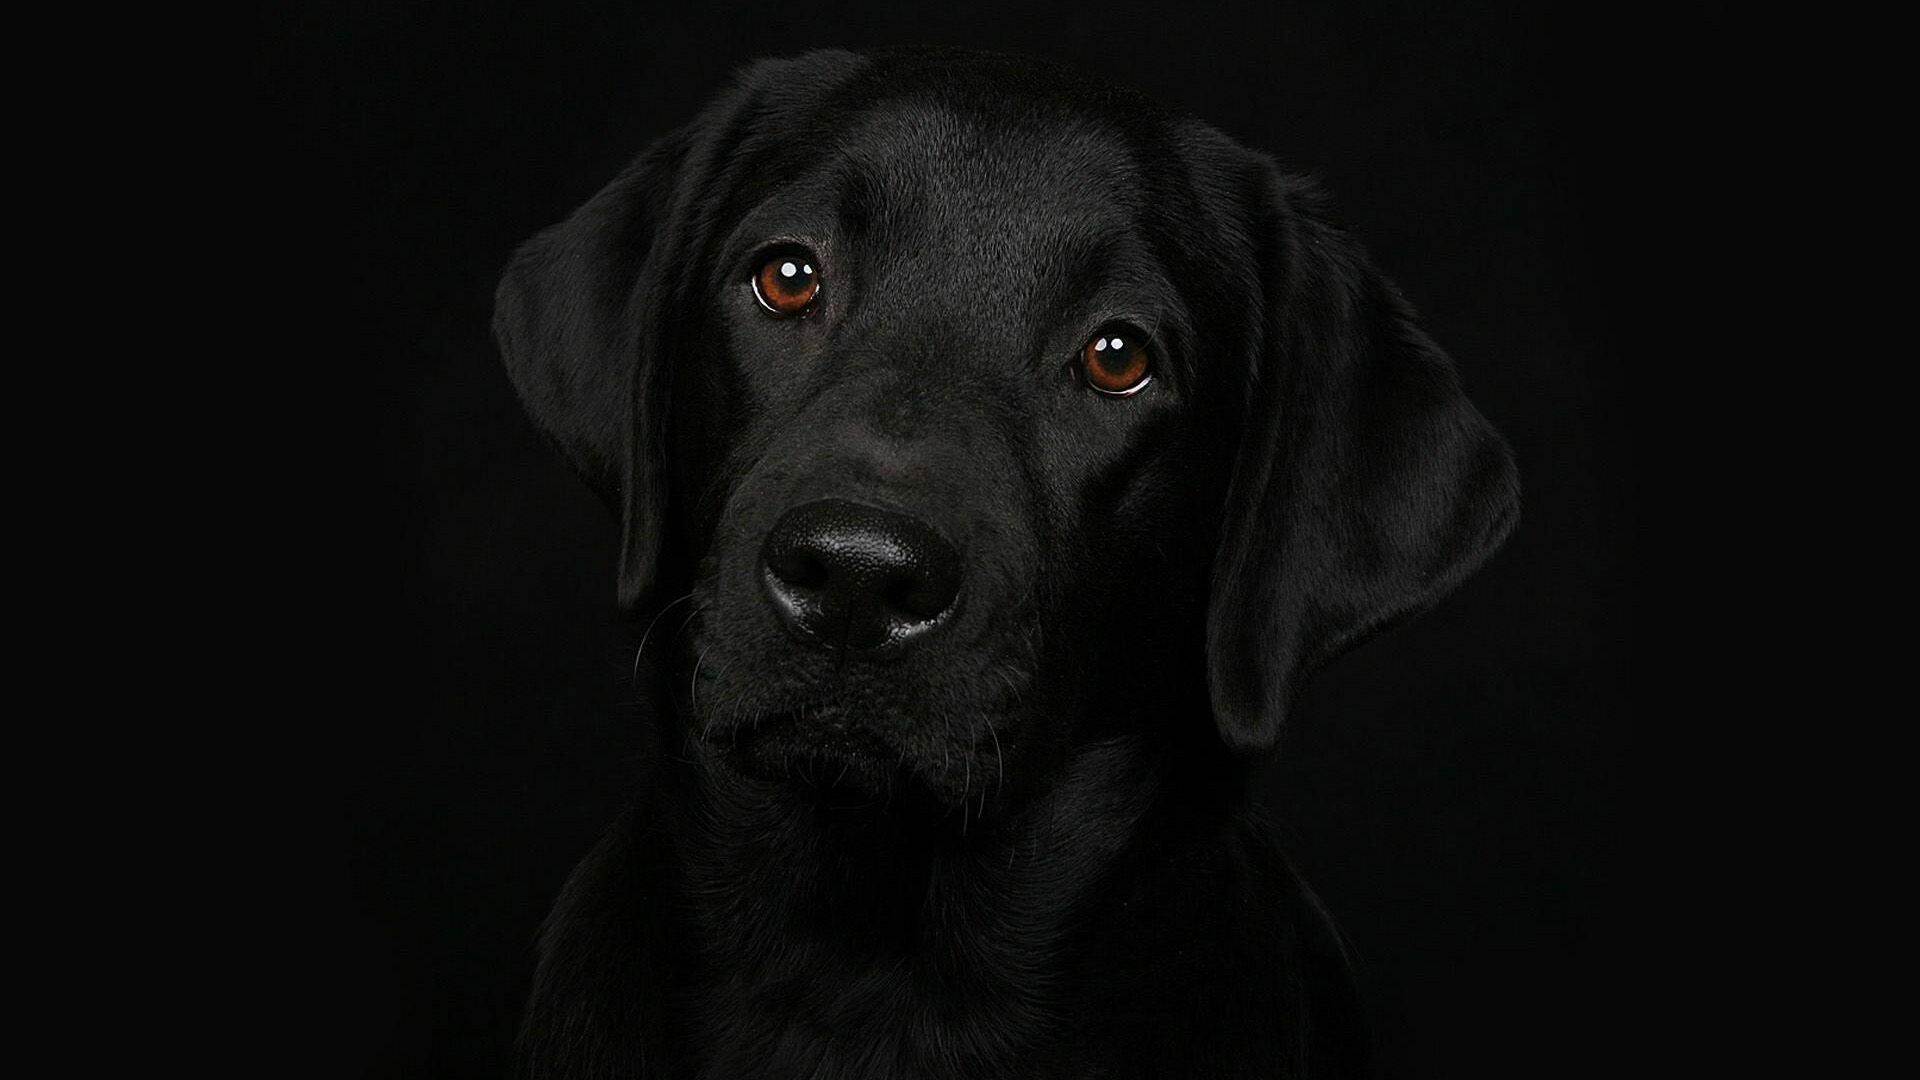 Labrador Retriever: Can be trained for rescue or therapy work. 1920x1080 Full HD Wallpaper.